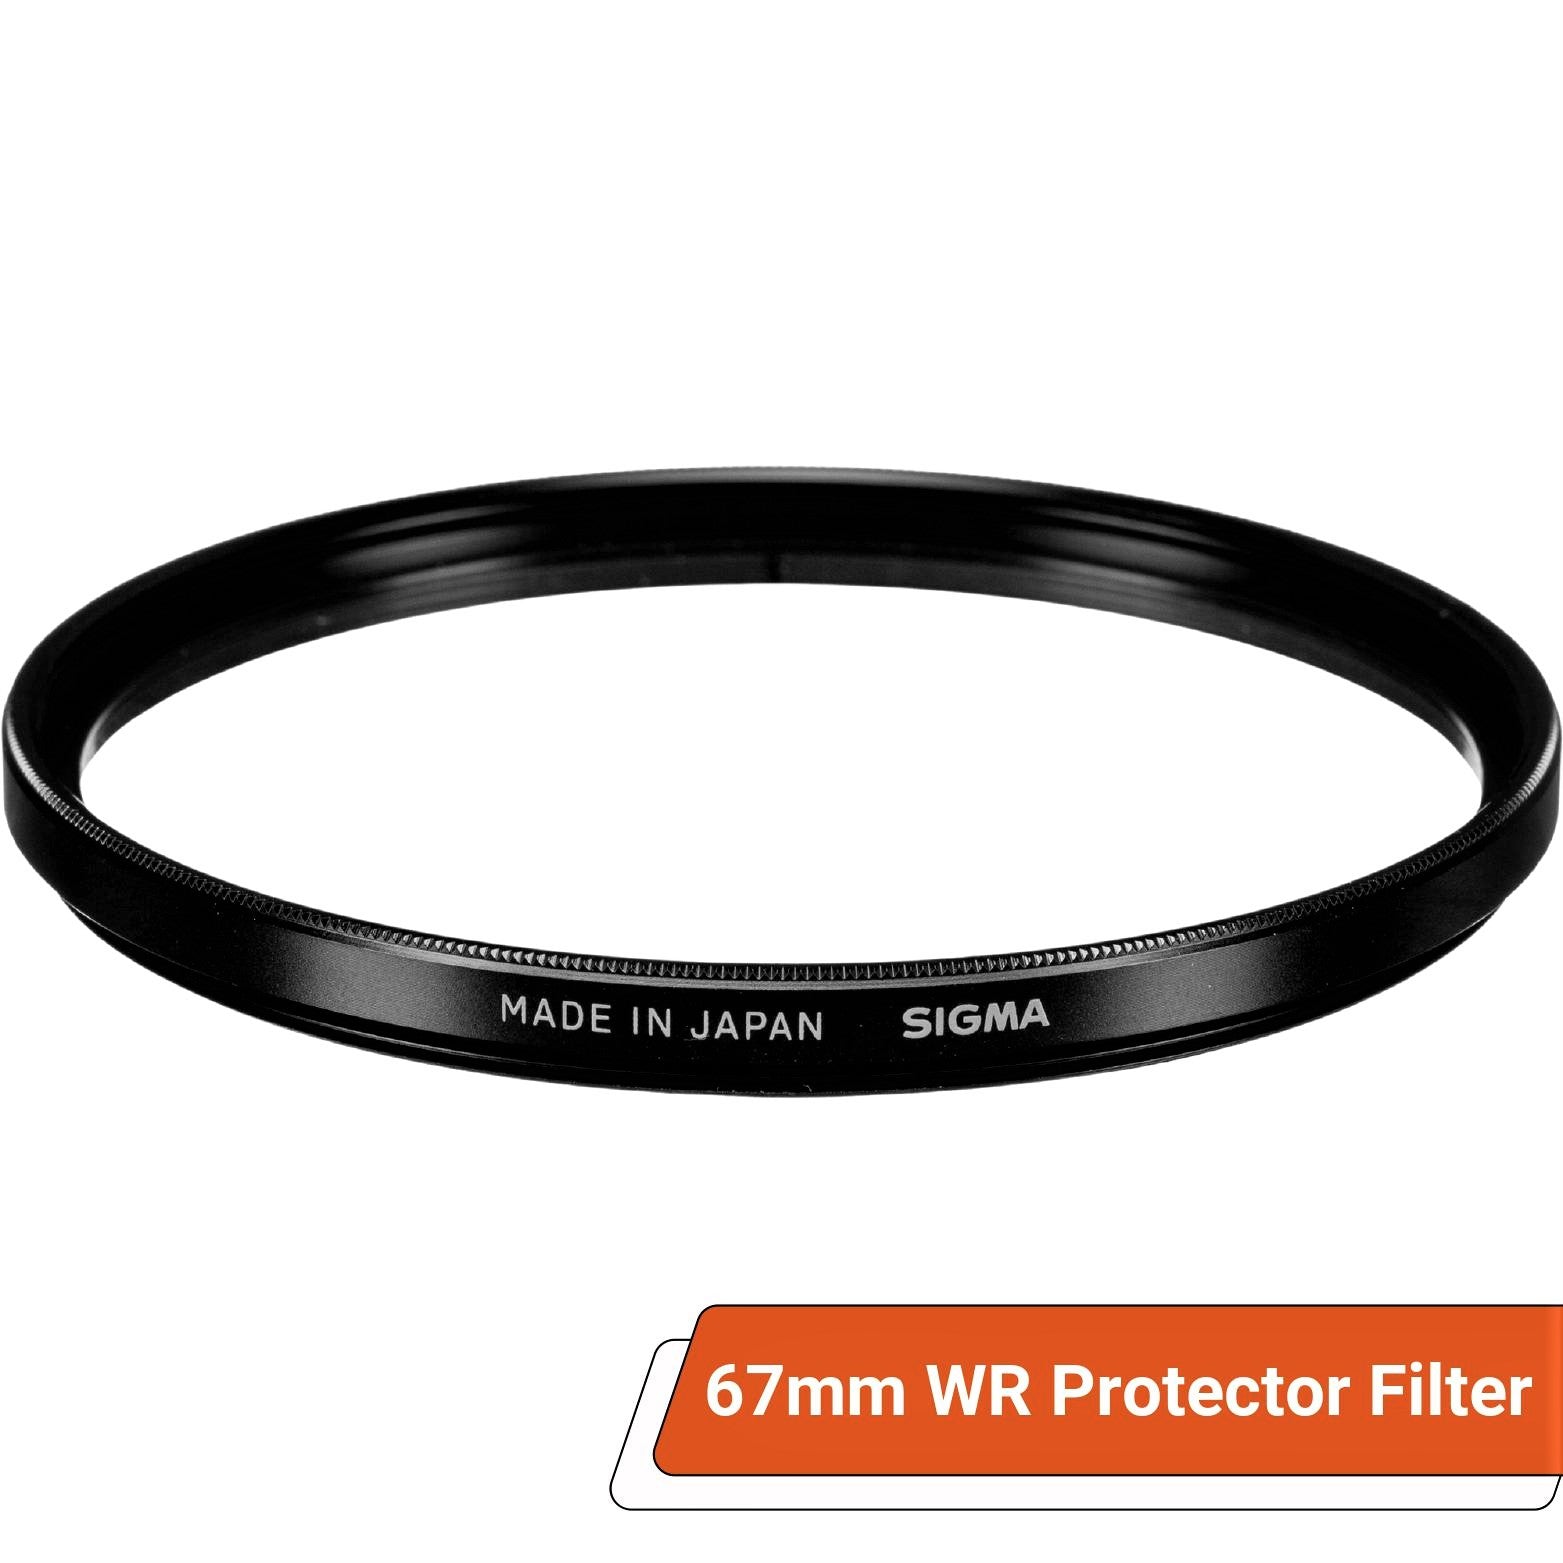 Sigma 67mm WR (Water Repellent) Protector Filter